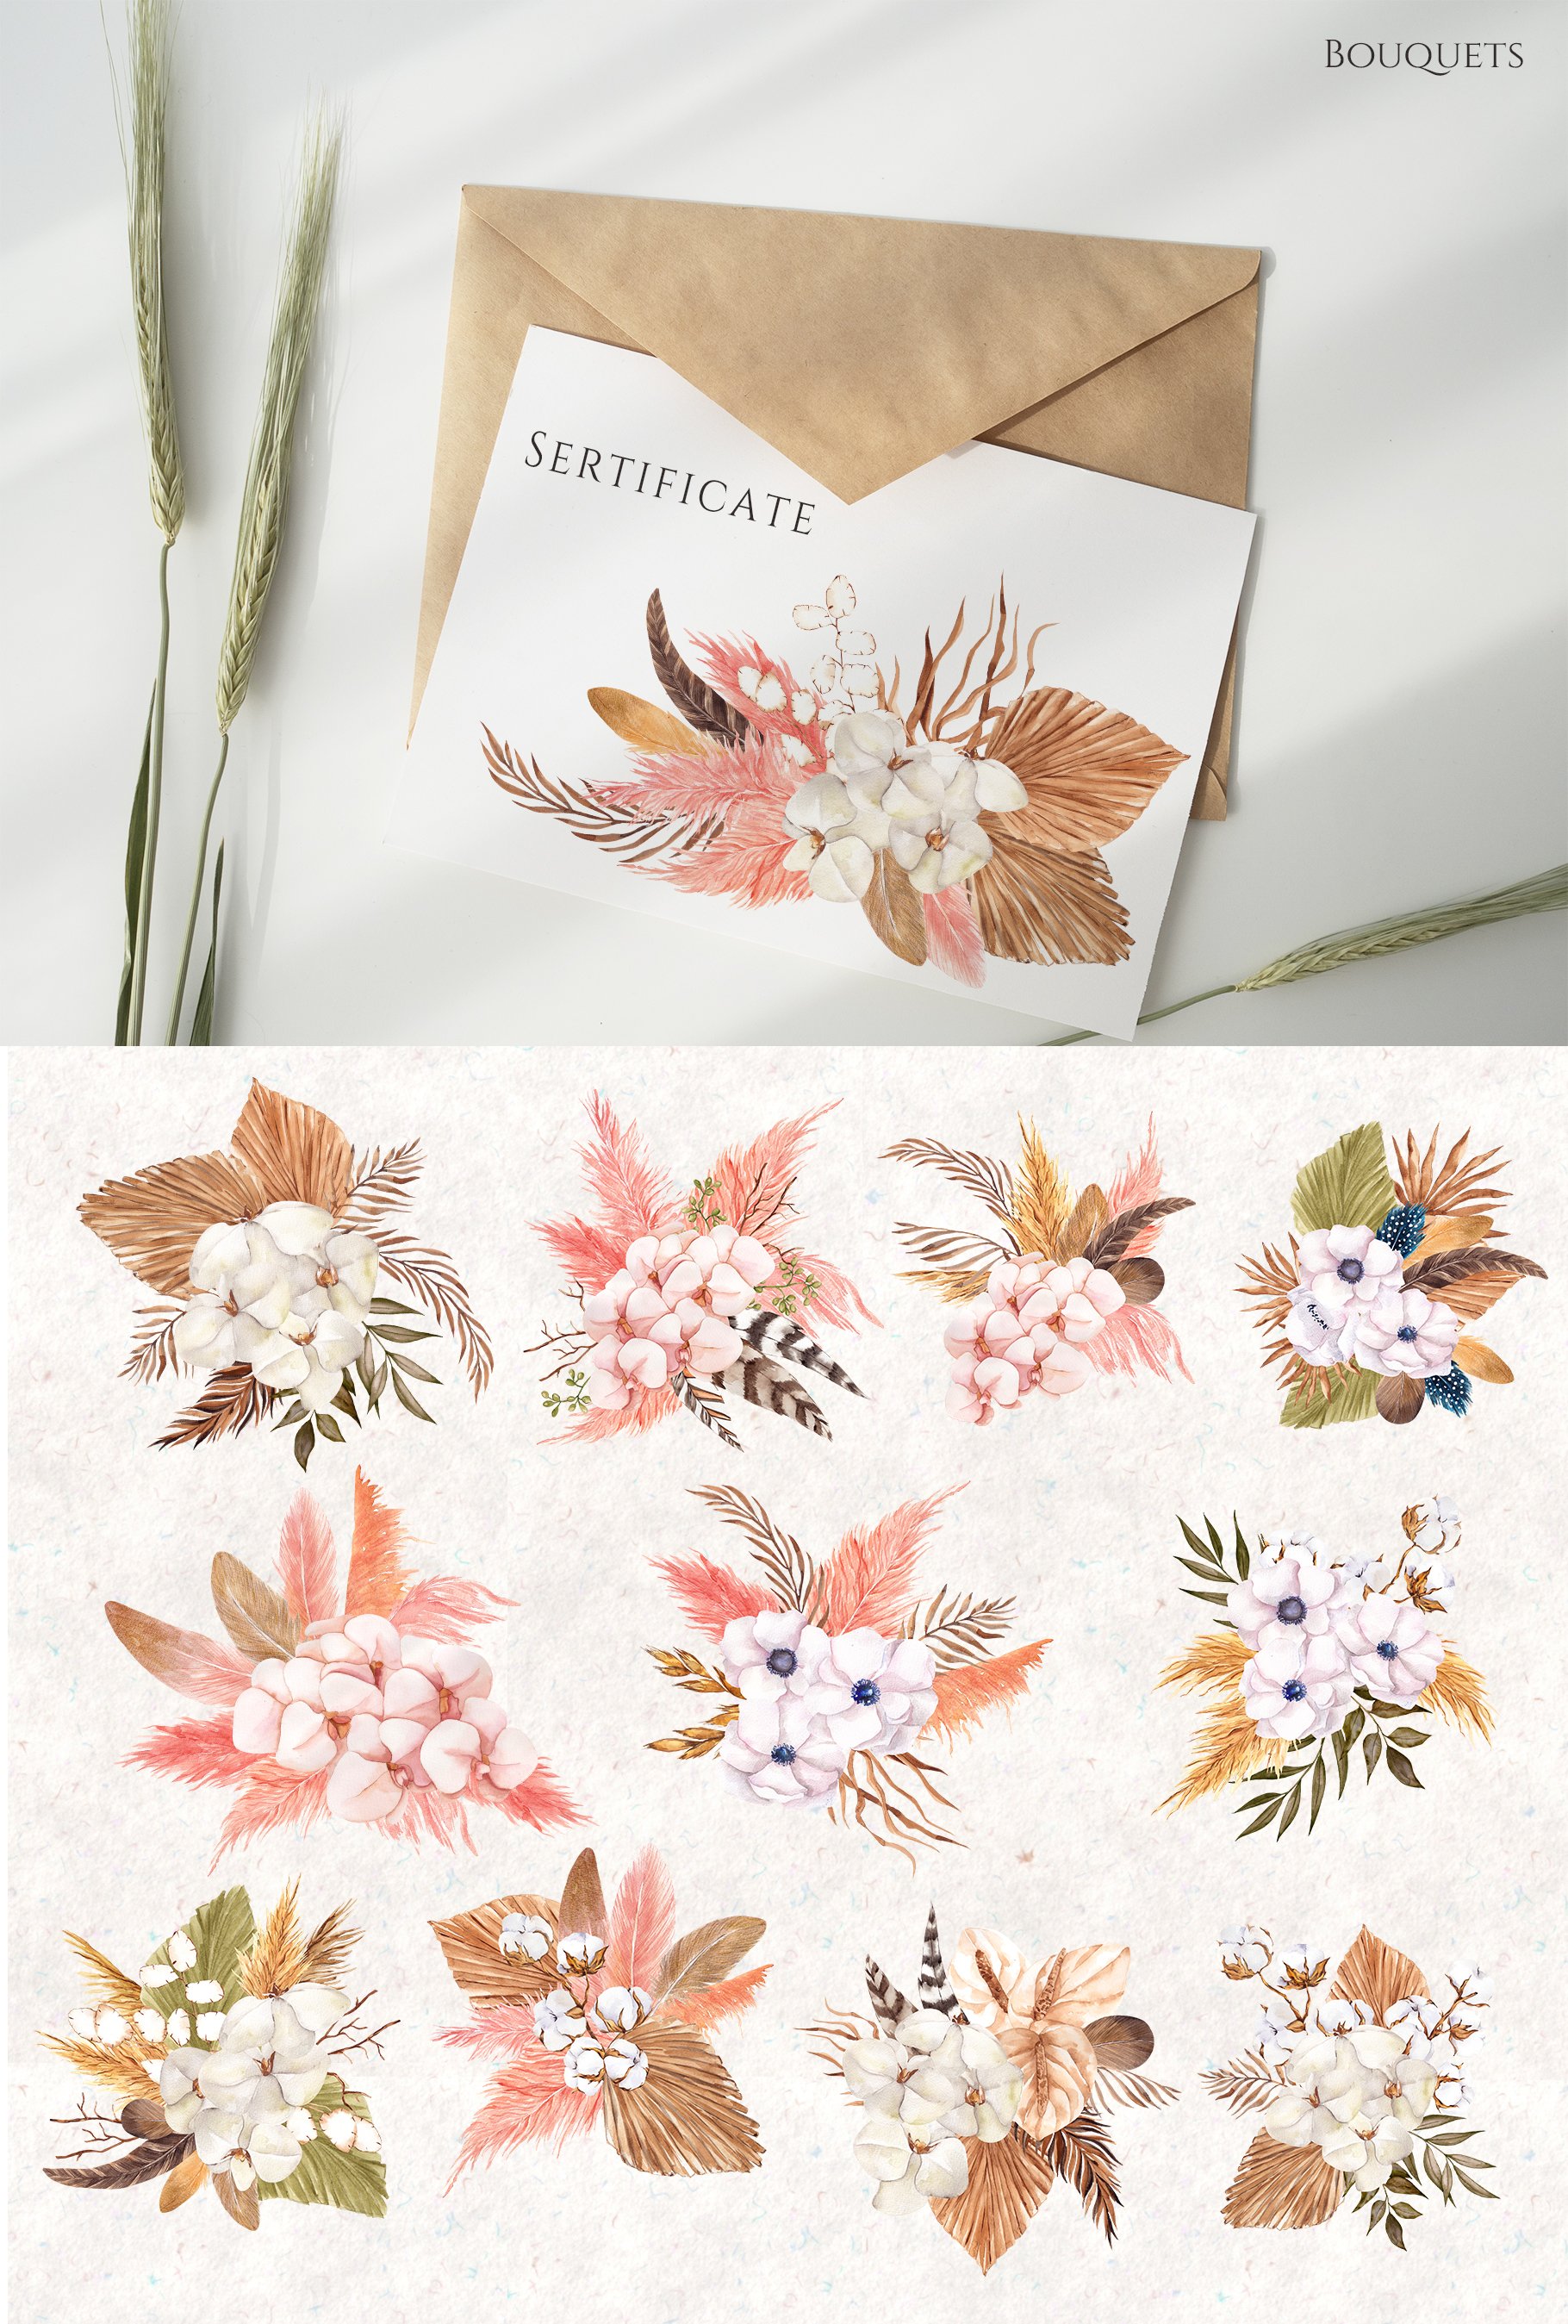 Card with flowers and leaves on it.